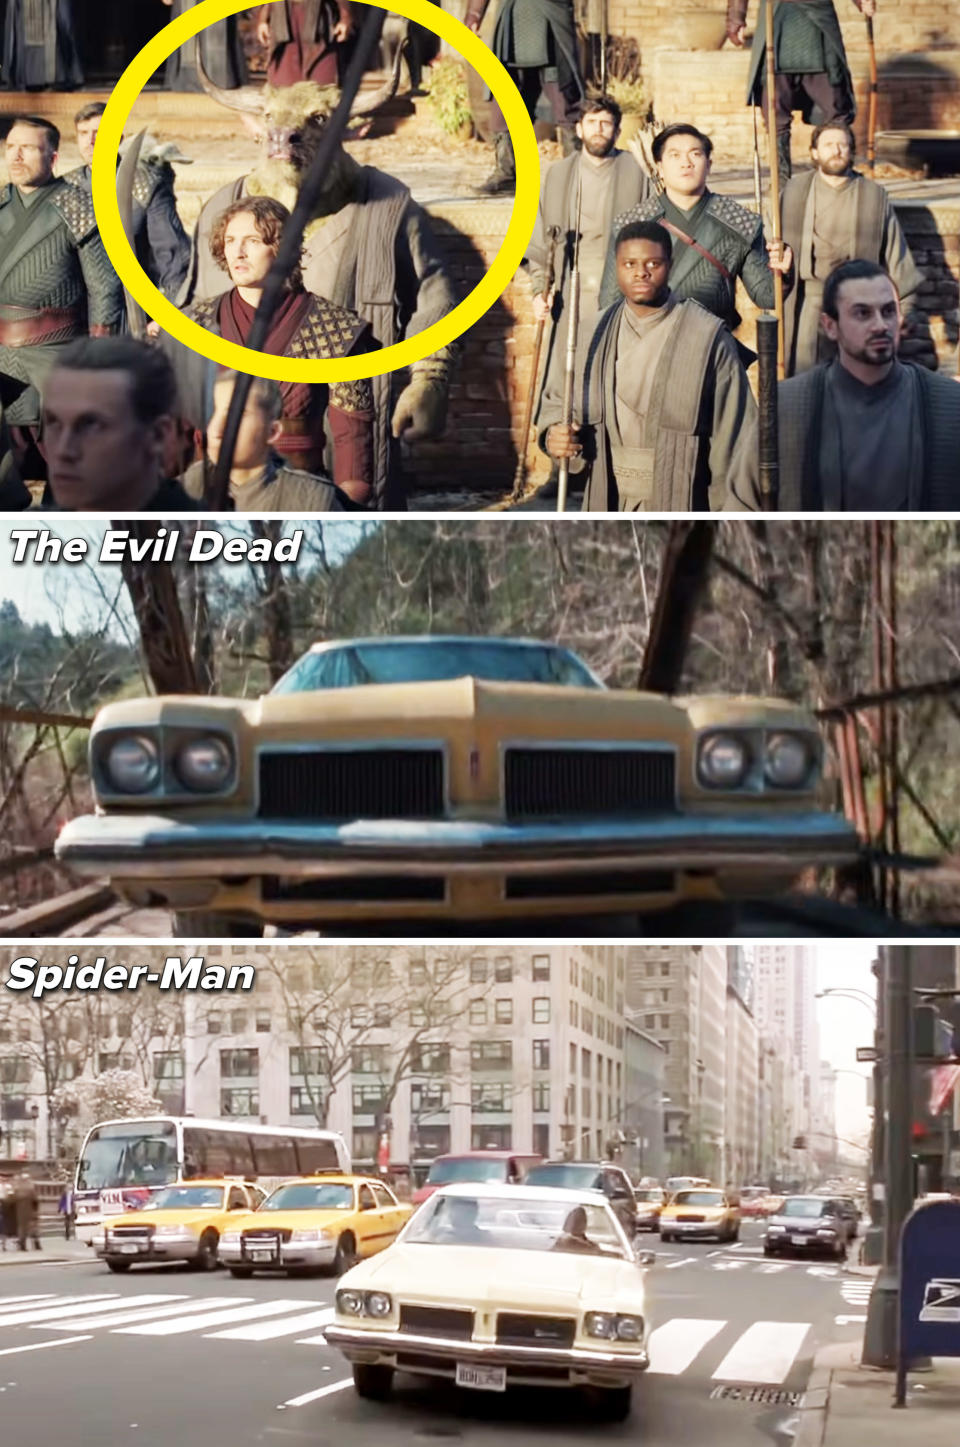 Screenshots from films showing the minotaur in Doctor Strange, and Sam Raimi's identical car in The Evil Dead and Spider-Man